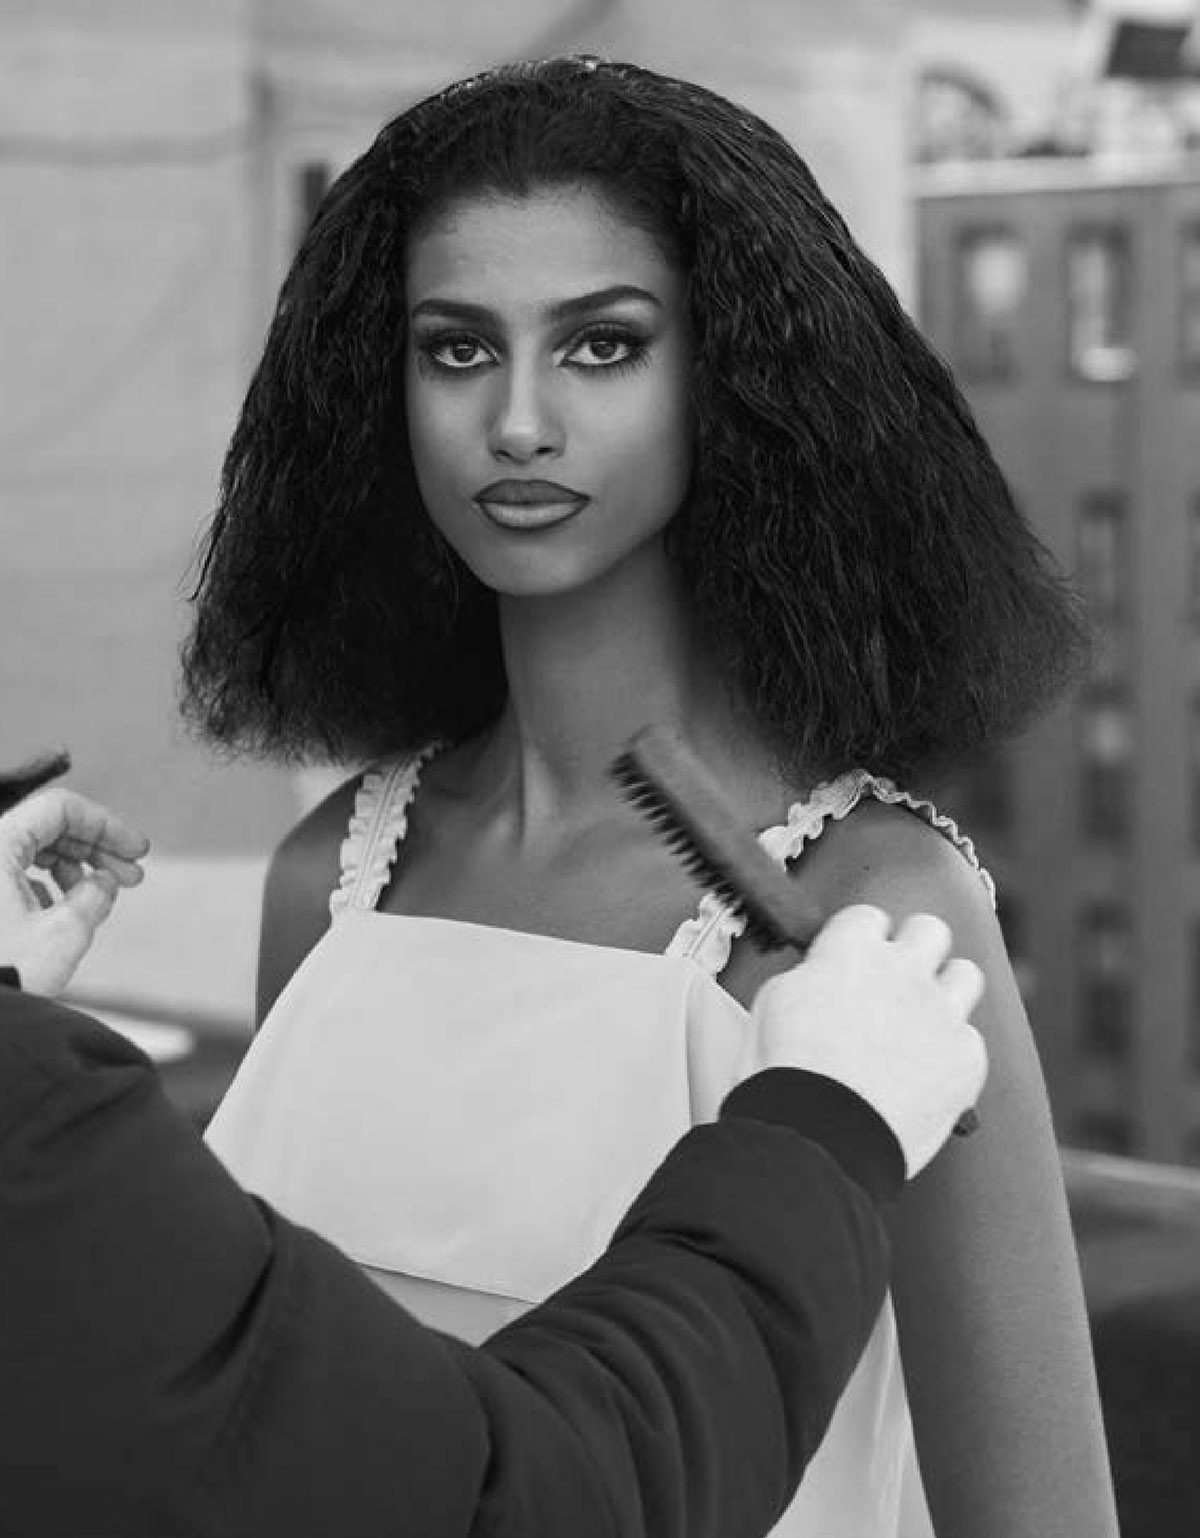 Imaan Hammam by Ethan James Green for M Le magazine du Monde February 27th,...